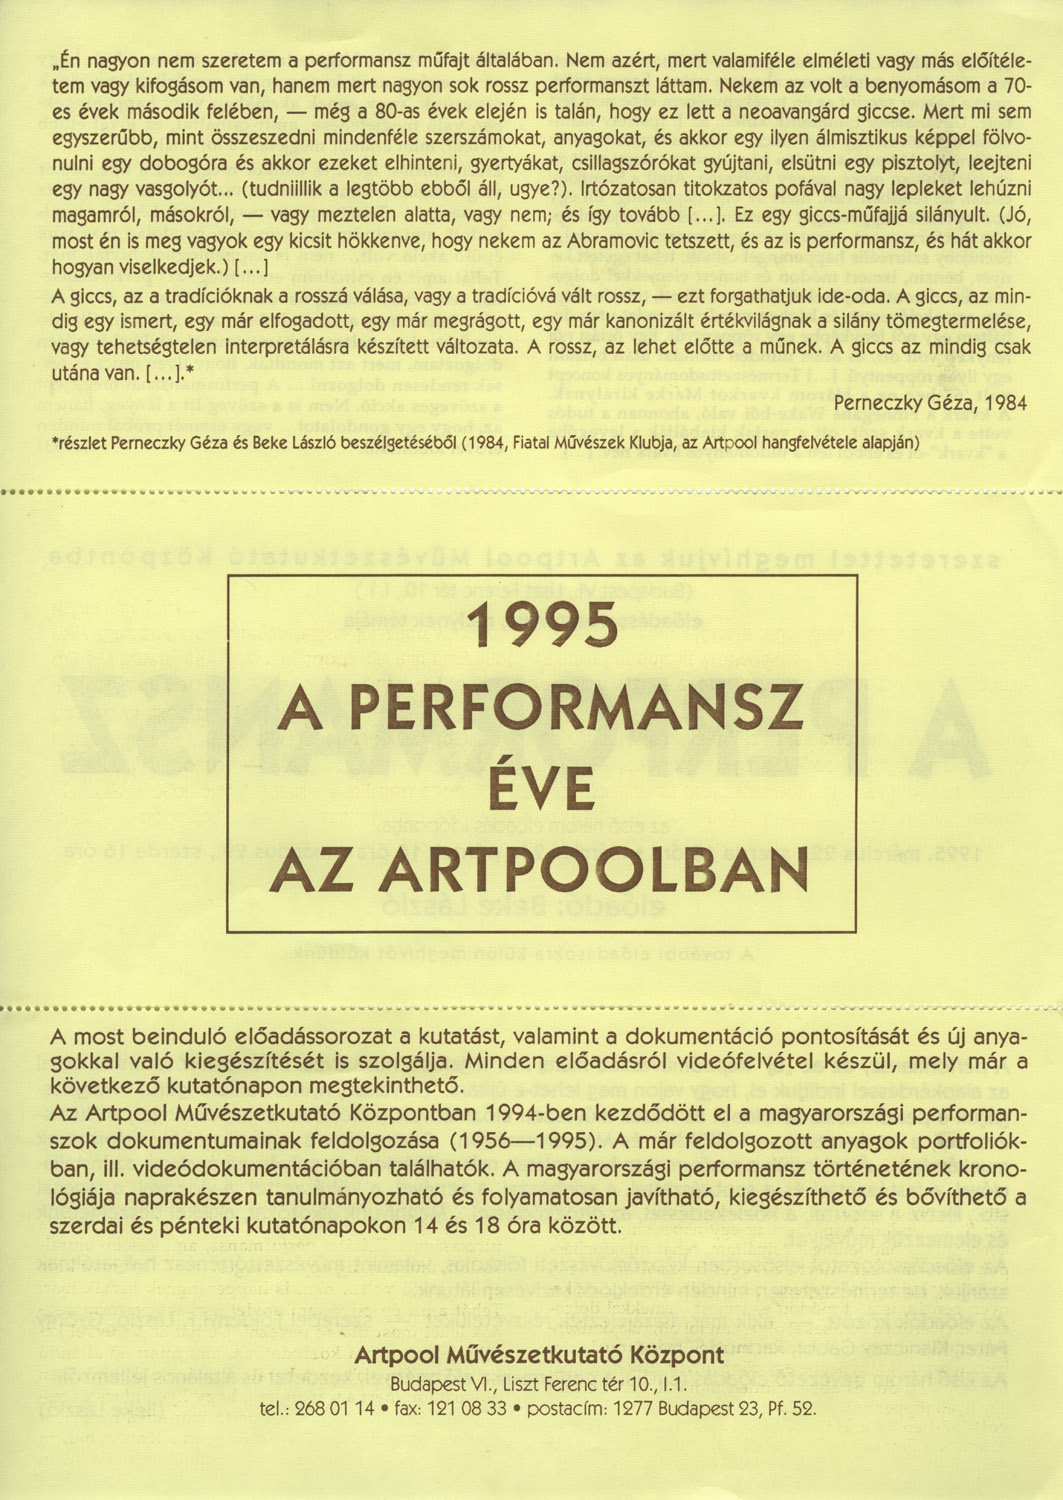 Poster/invitation announcing the Year of Performance at Artpool and inviting to the first lecture by László Beke, Artpool Art Research Center, Budapest, 1995 (first and second page)